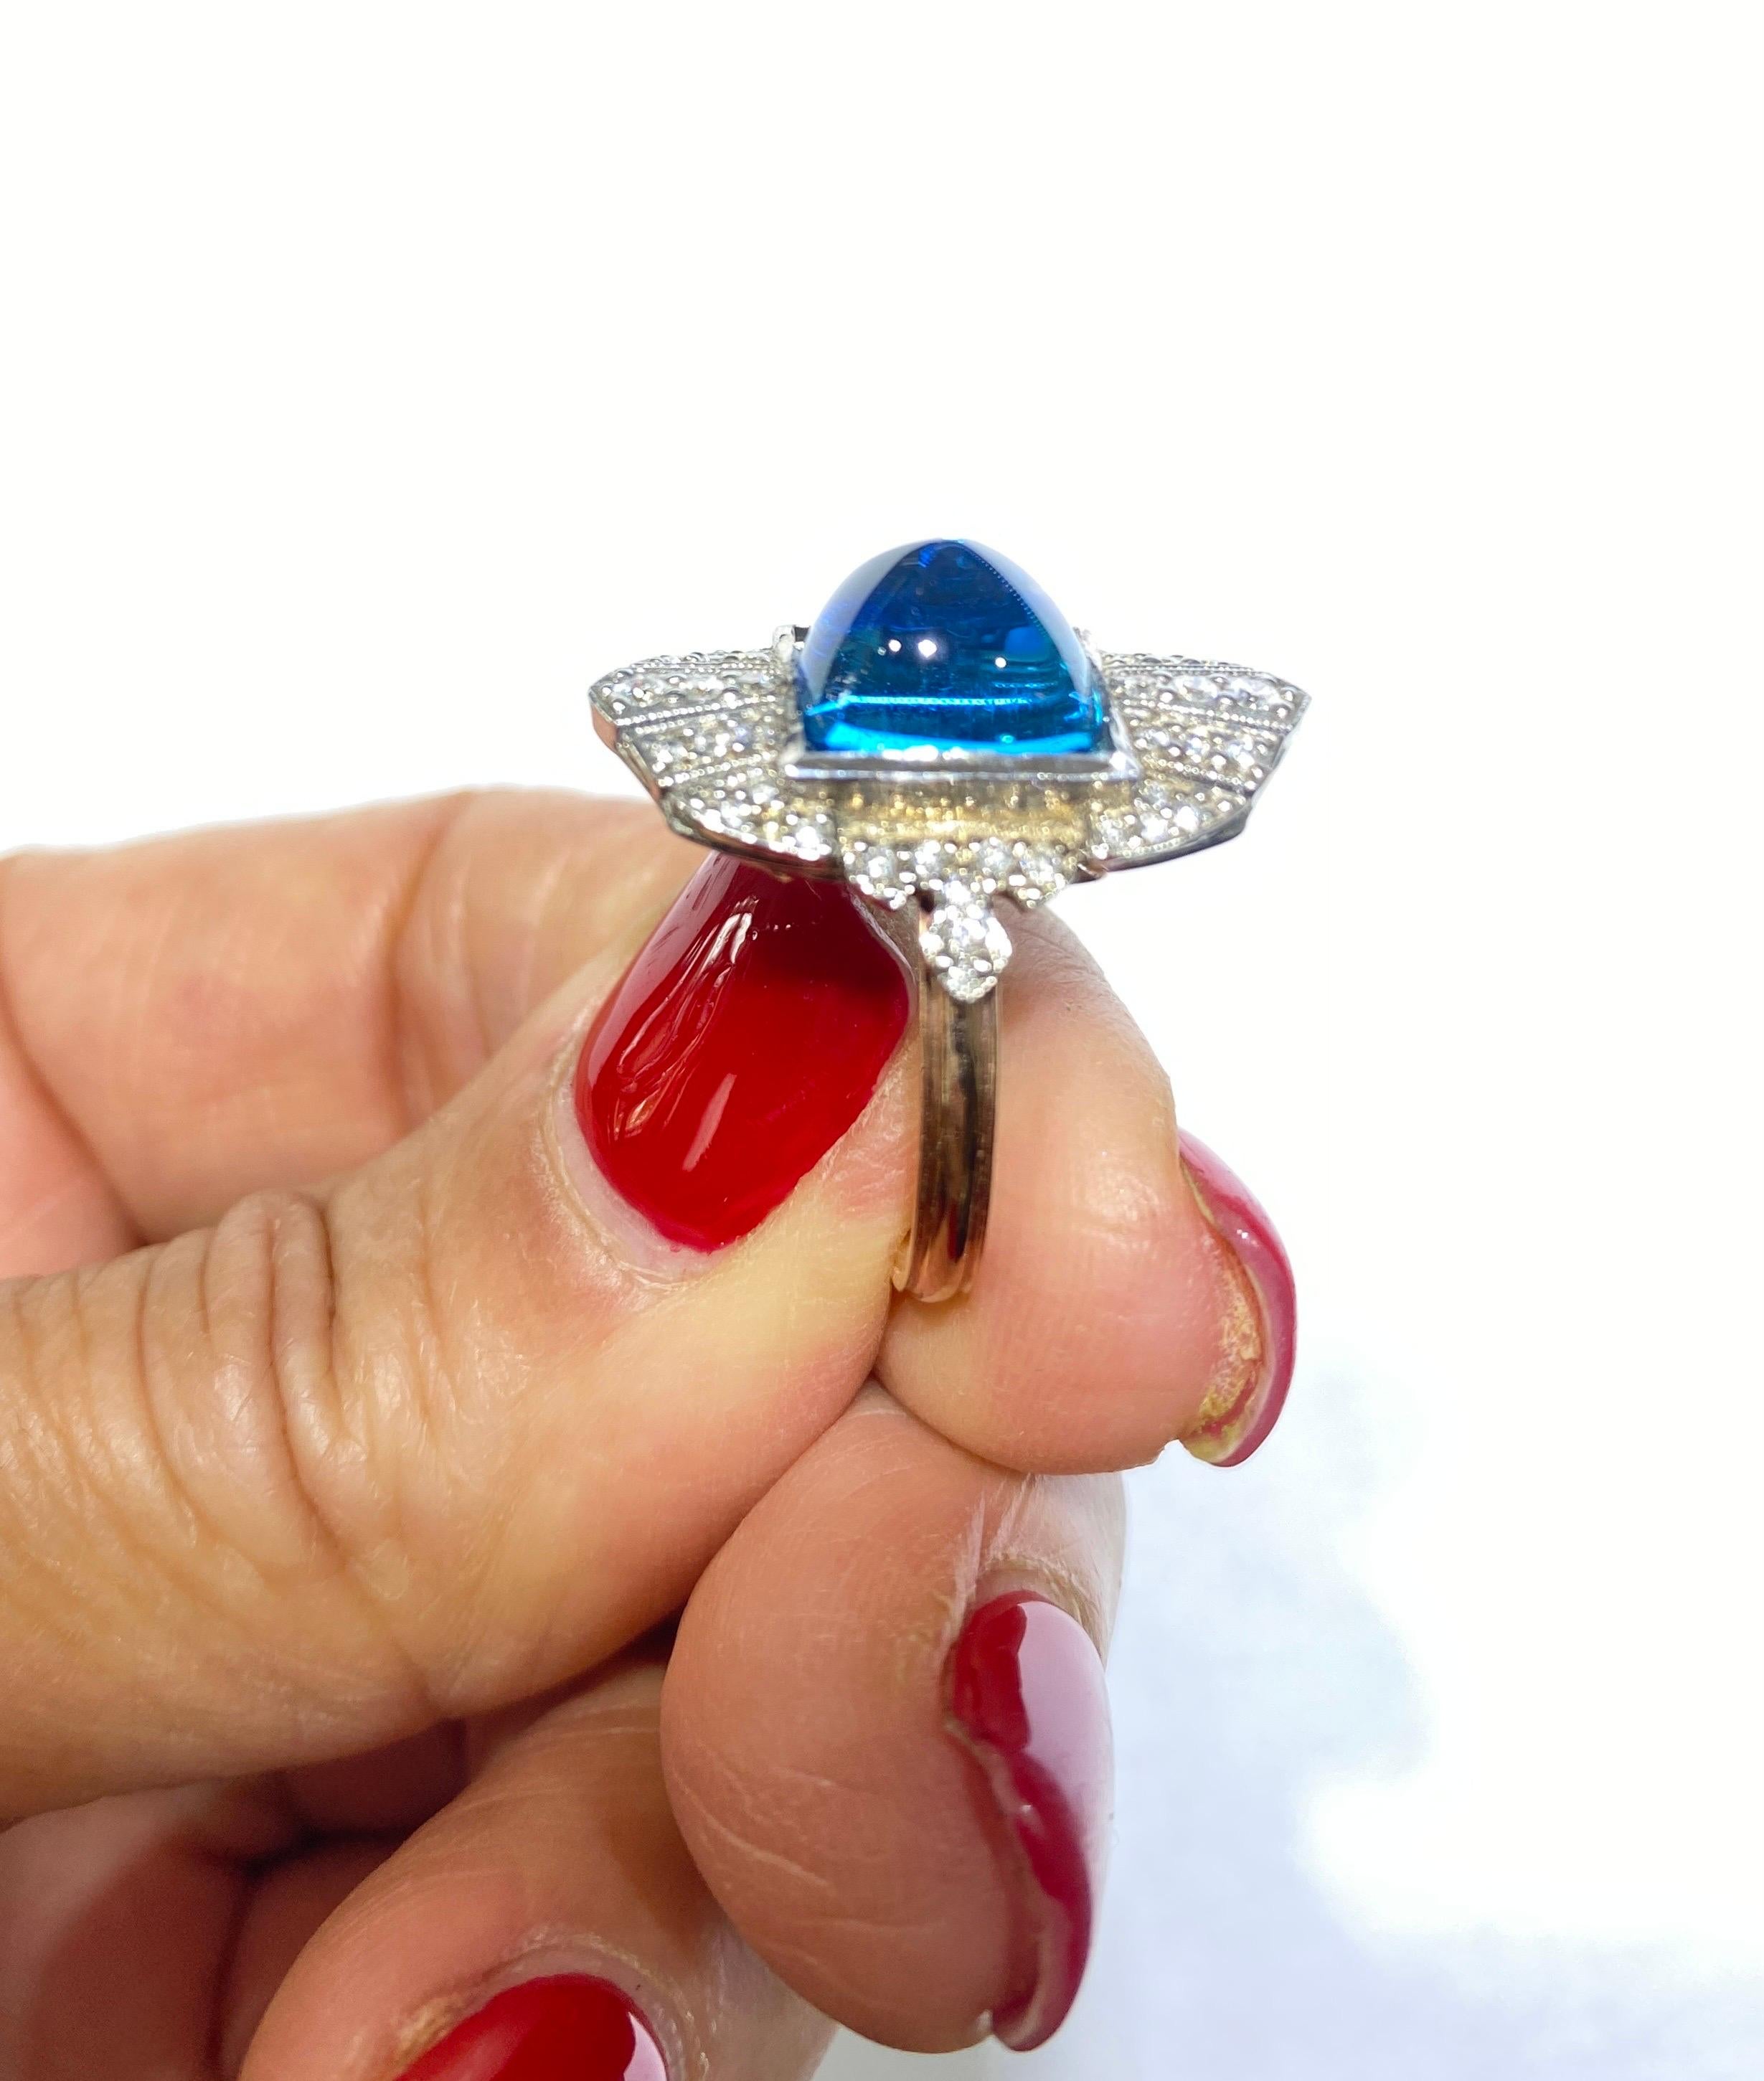 Sugarloaf Cabochon cut blue stone is set in a shield design of pavé diamonds. Pretty ring with a great Victorian style and underneath open gallery design. Diamonds encase the rings and are pave set. The total diamond weight is approximately .50